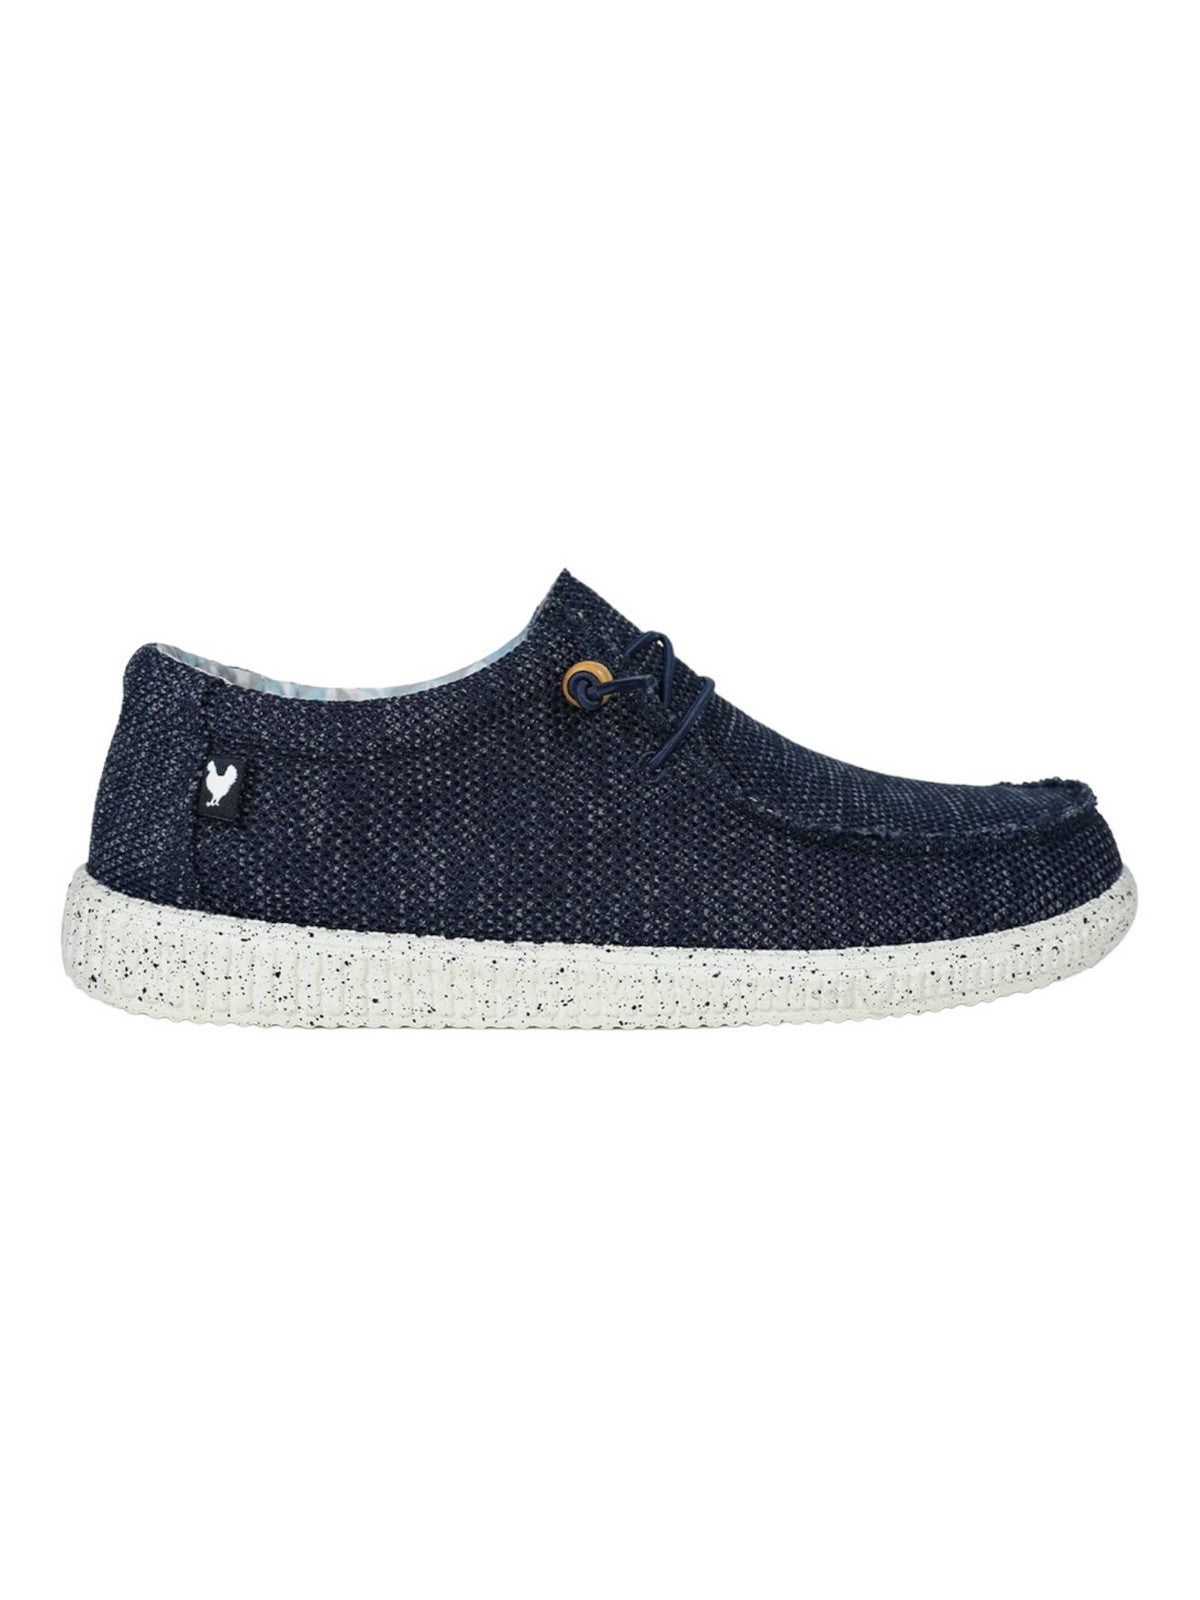 PITAS Mocassin Hommes WP150 W KNITTED PERISCOPE Bleu